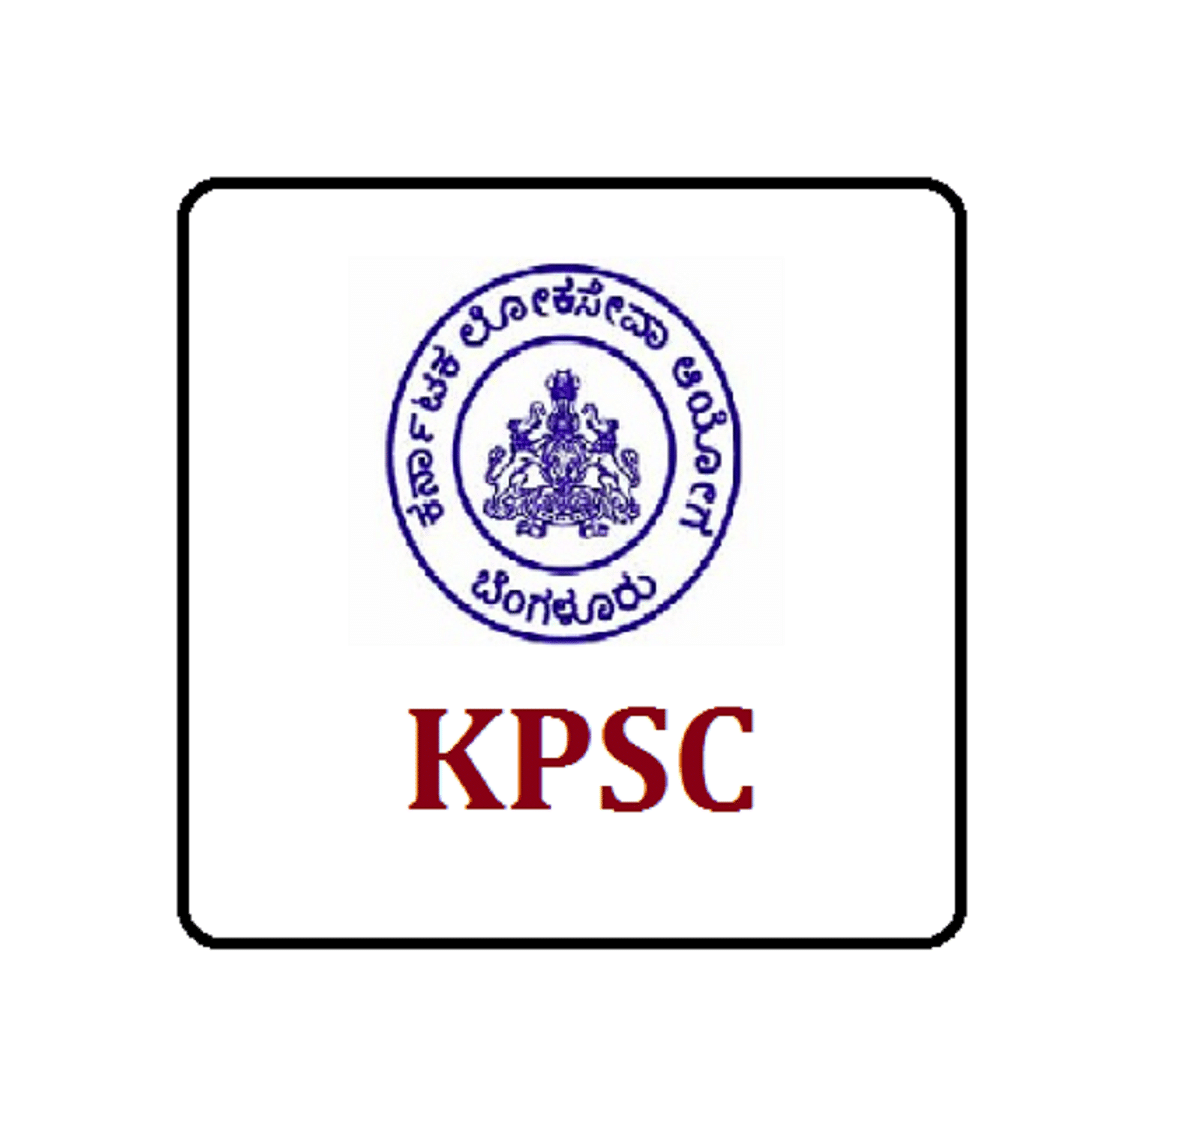 KPSC KAS Results 2021 Released, Steps to Check Here